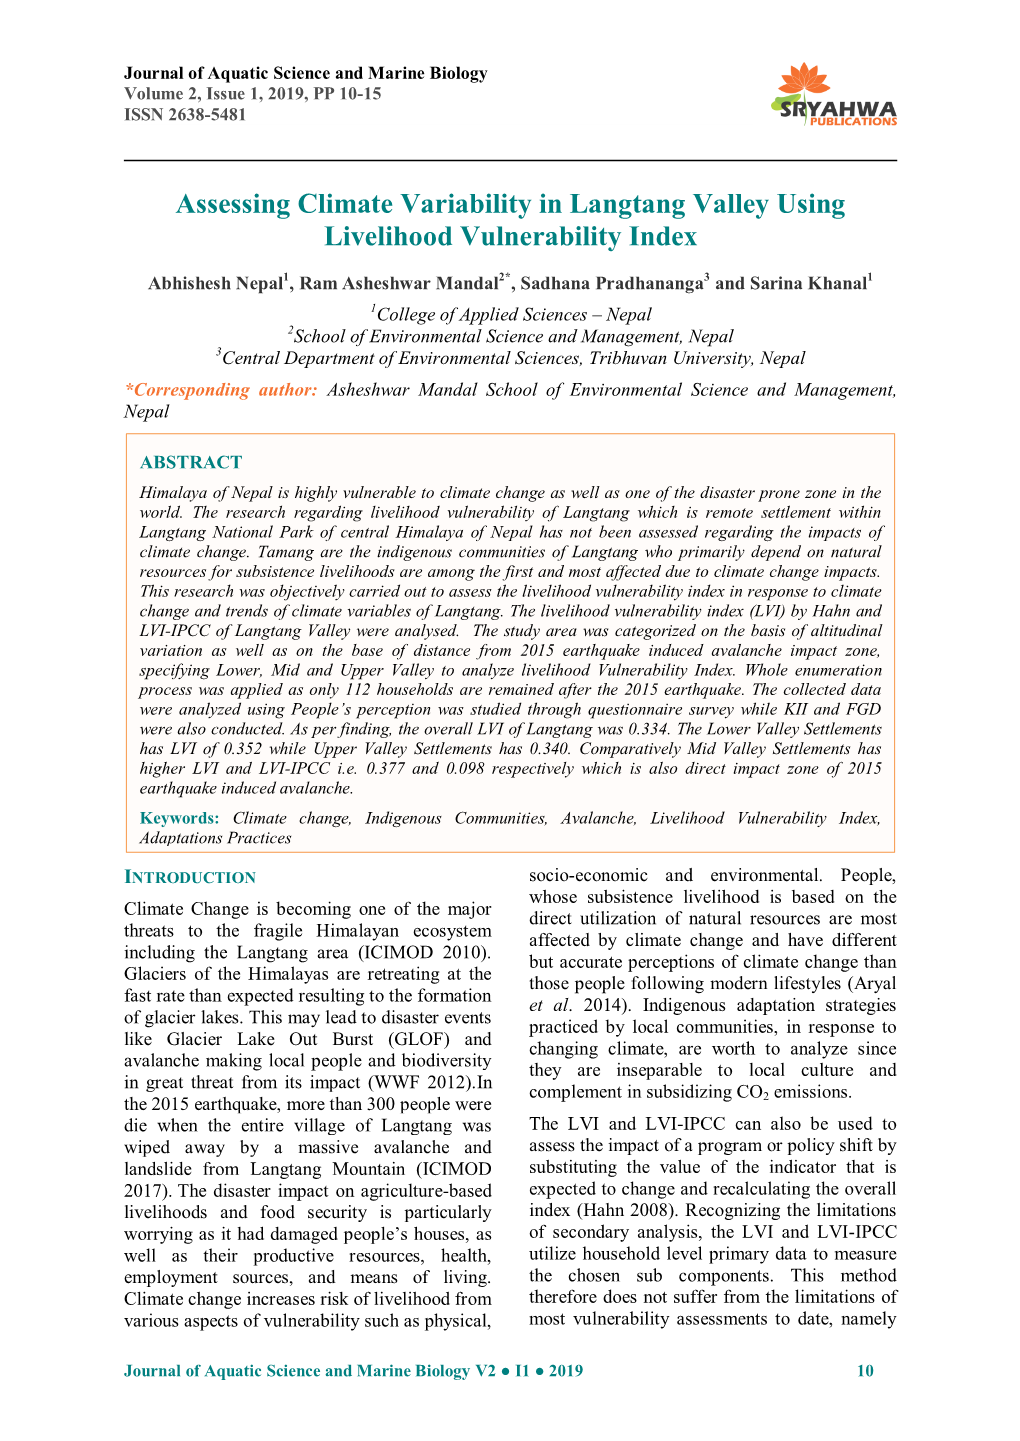 Assessing Climate Variability in Langtang Valley Using Livelihood Vulnerability Index